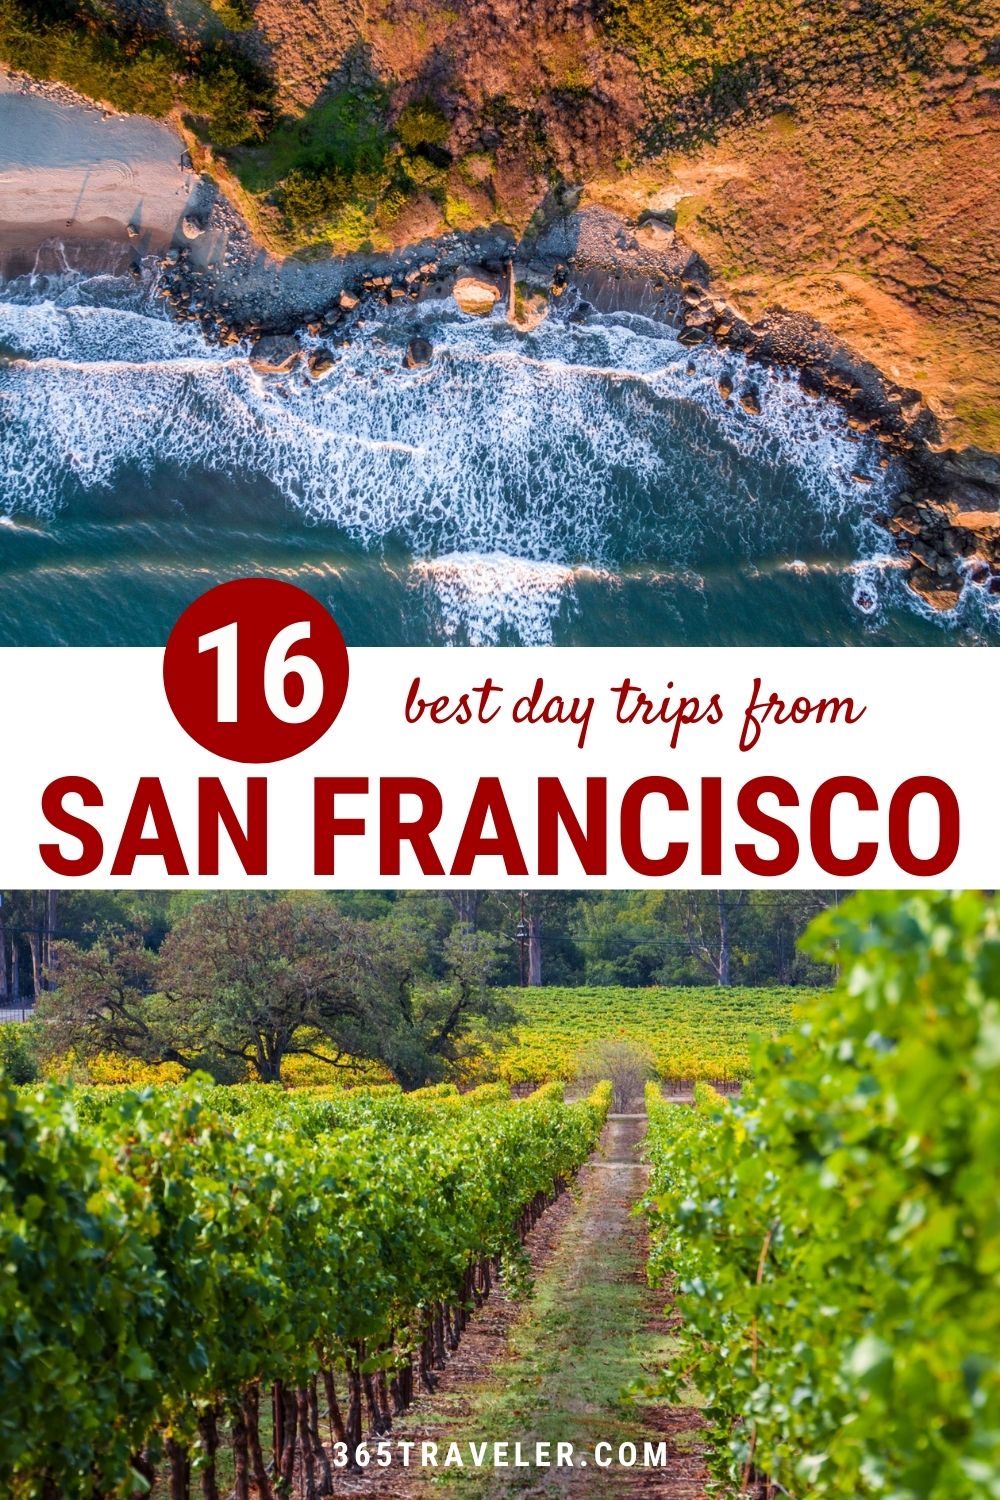 16 ABSOLUTE BEST DAY TRIPS FROM SAN FRANCISCO